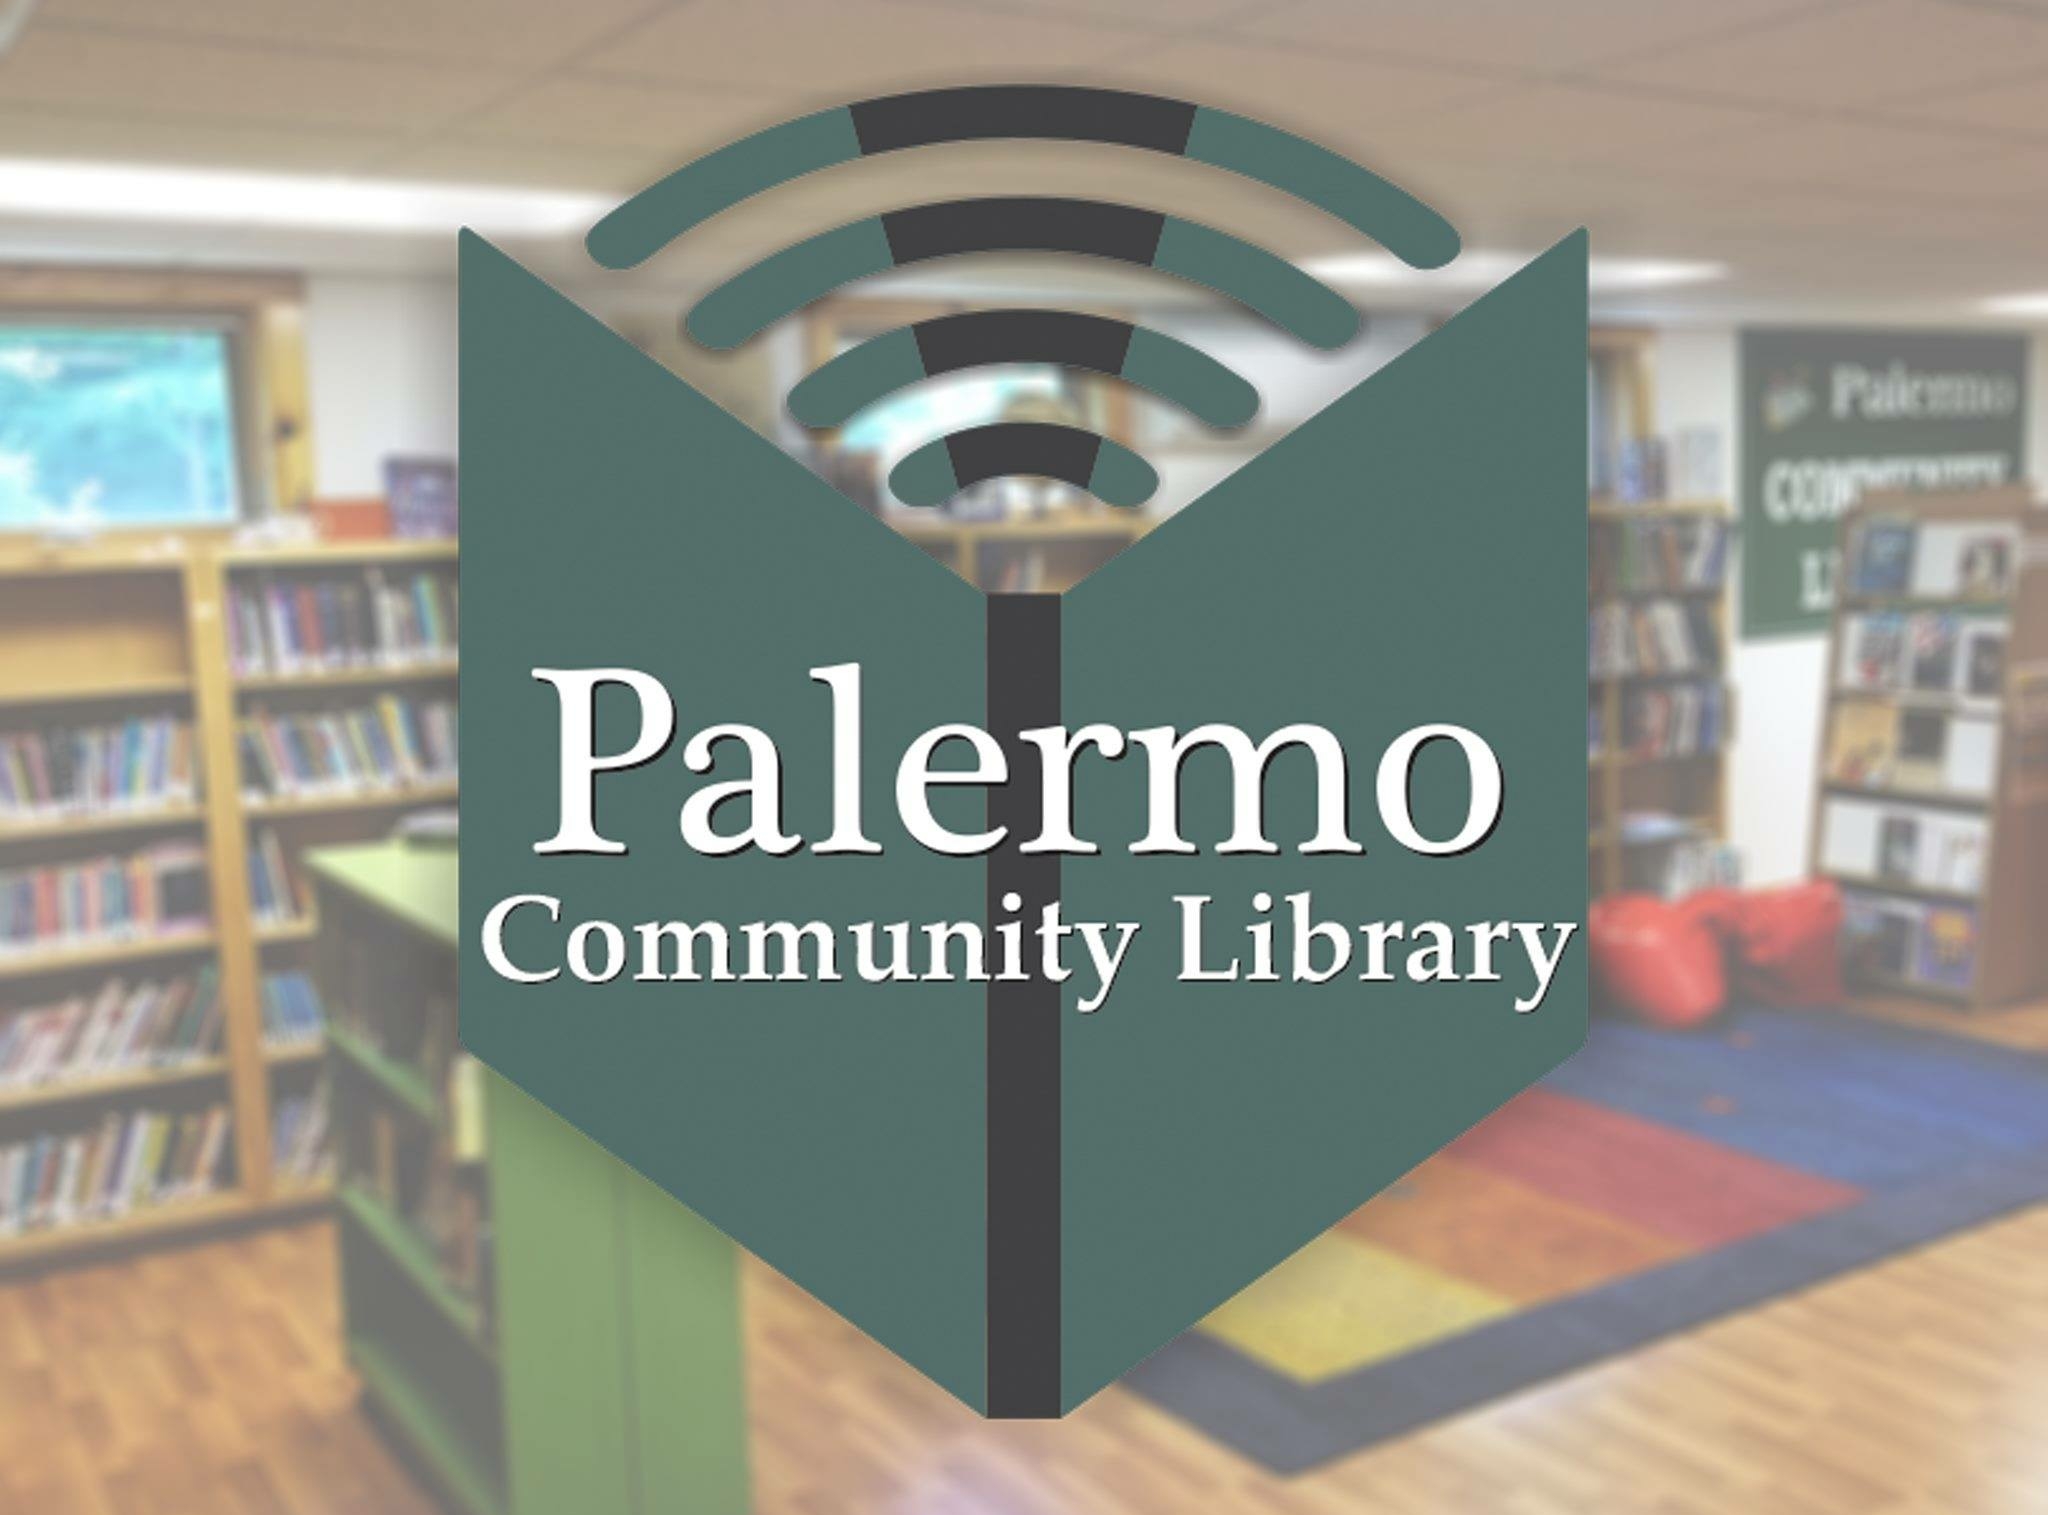 Palermo Community Library annual meeting going virtual